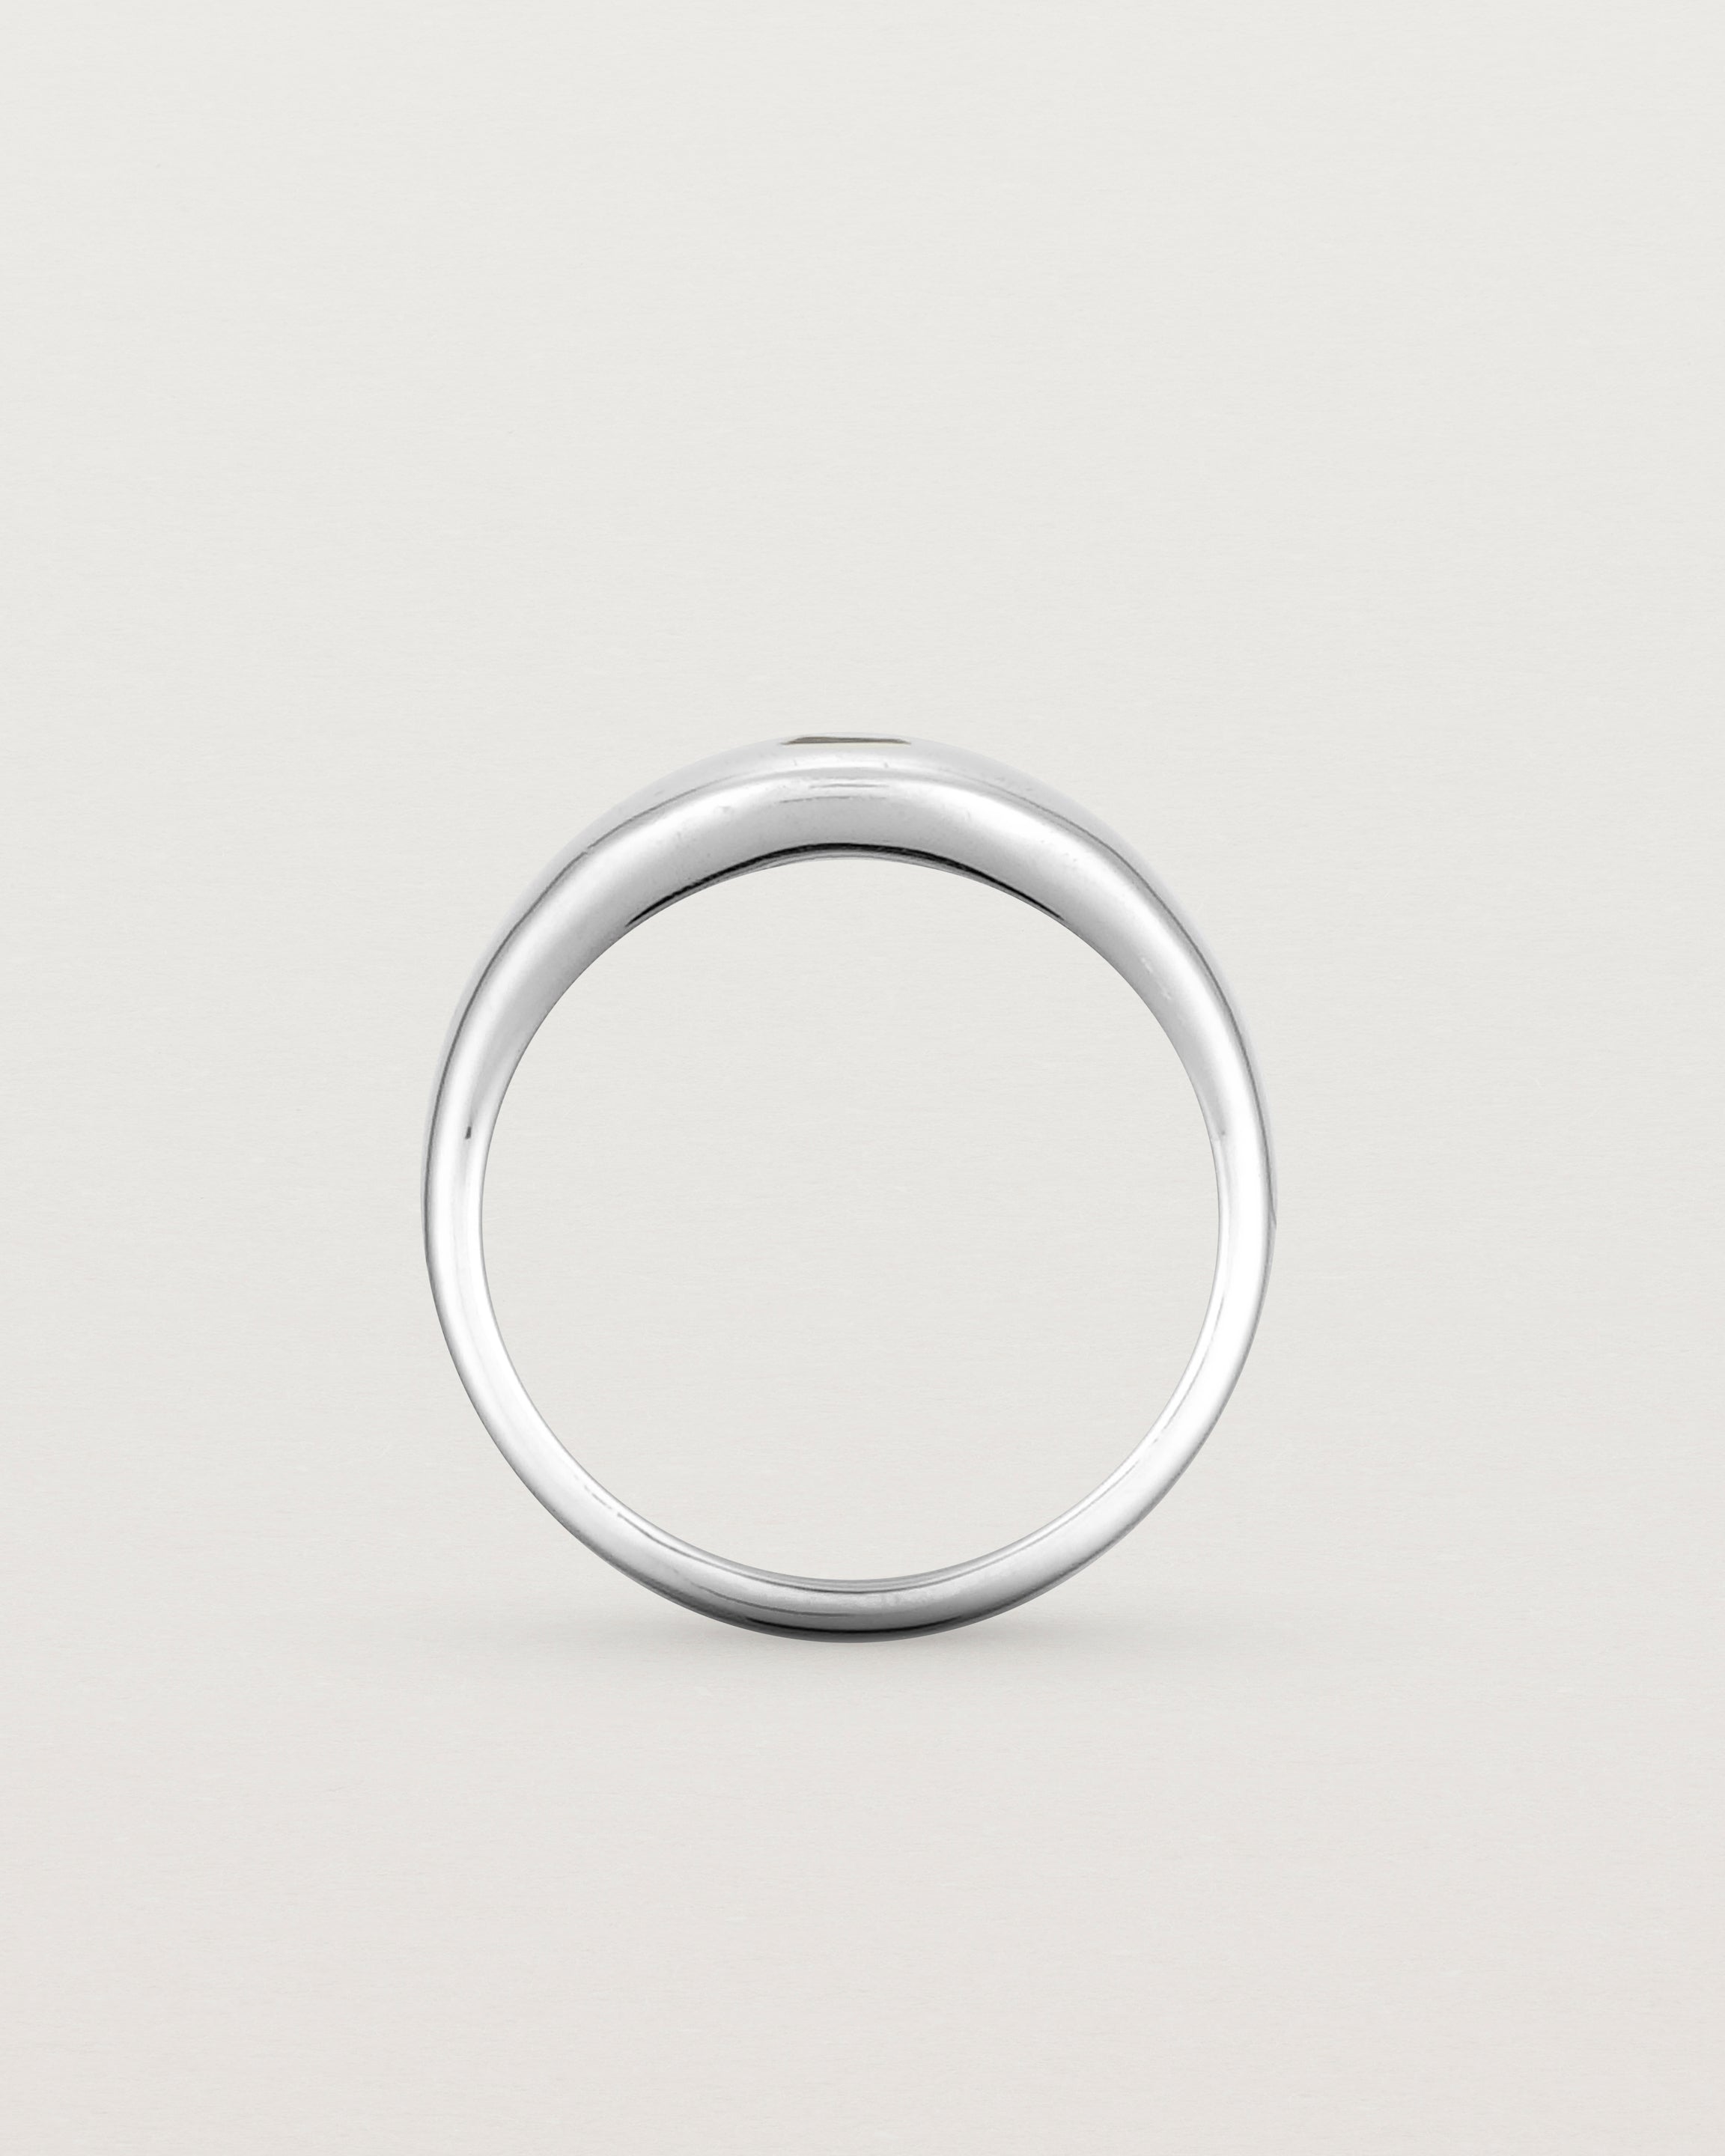 standing view of the Seule Single Ring | Diamond | White Gold.